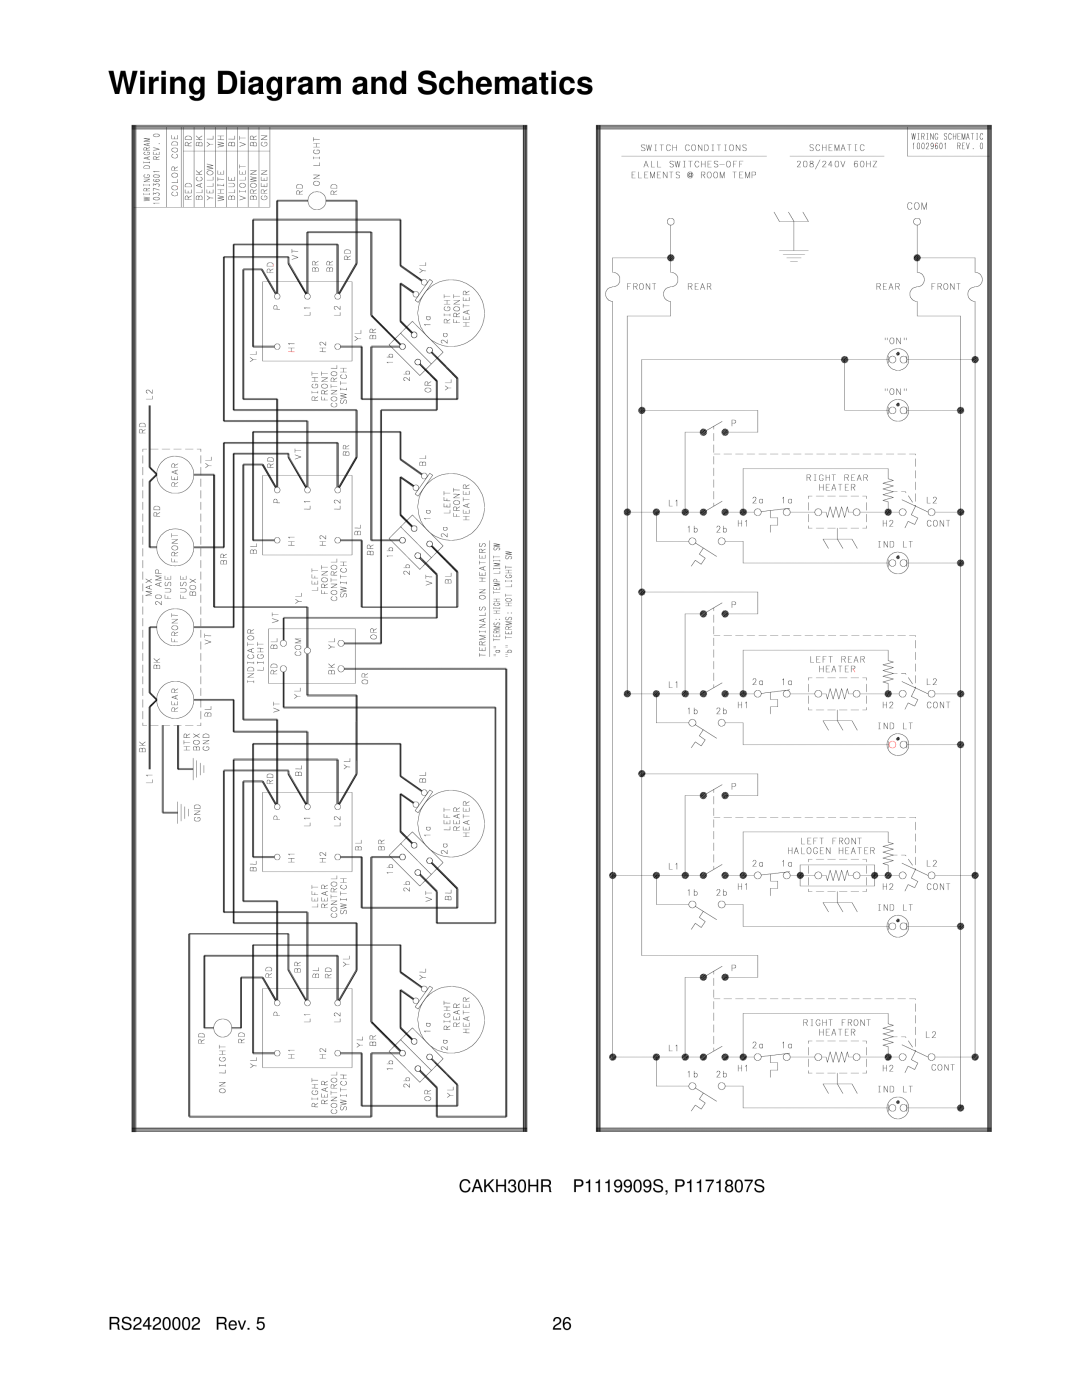 Amana AK2T30/36E1/W1, AK2H30, AK2H36E2, AK2HW2 Wiring Diagram and Schematics, CAKH30HR P1119909S, P1171807S, RS2420002 Rev 